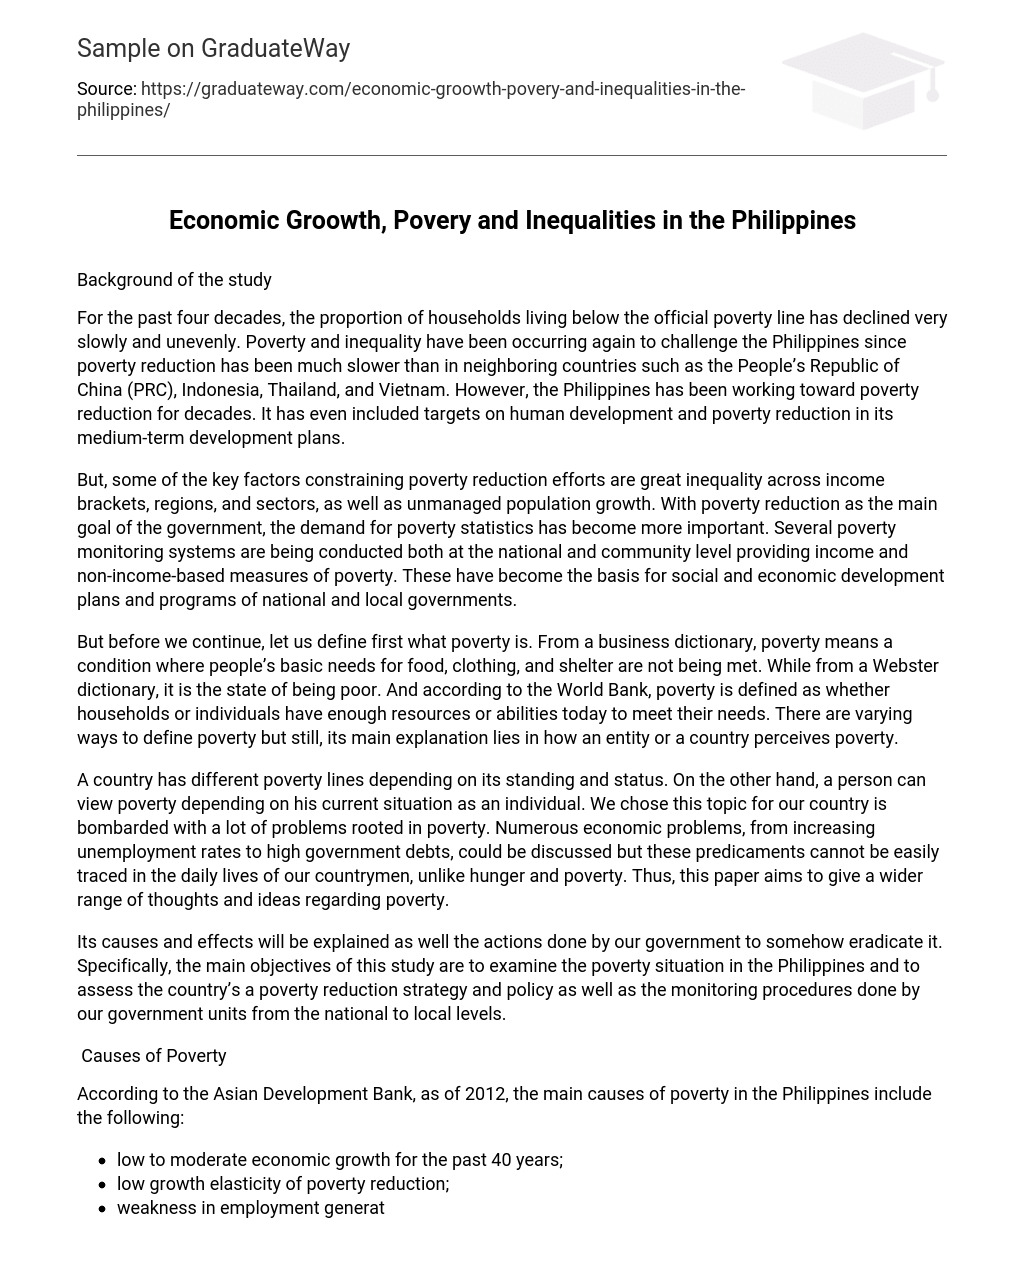 Economic Groowth, Povery and Inequalities in the Philippines